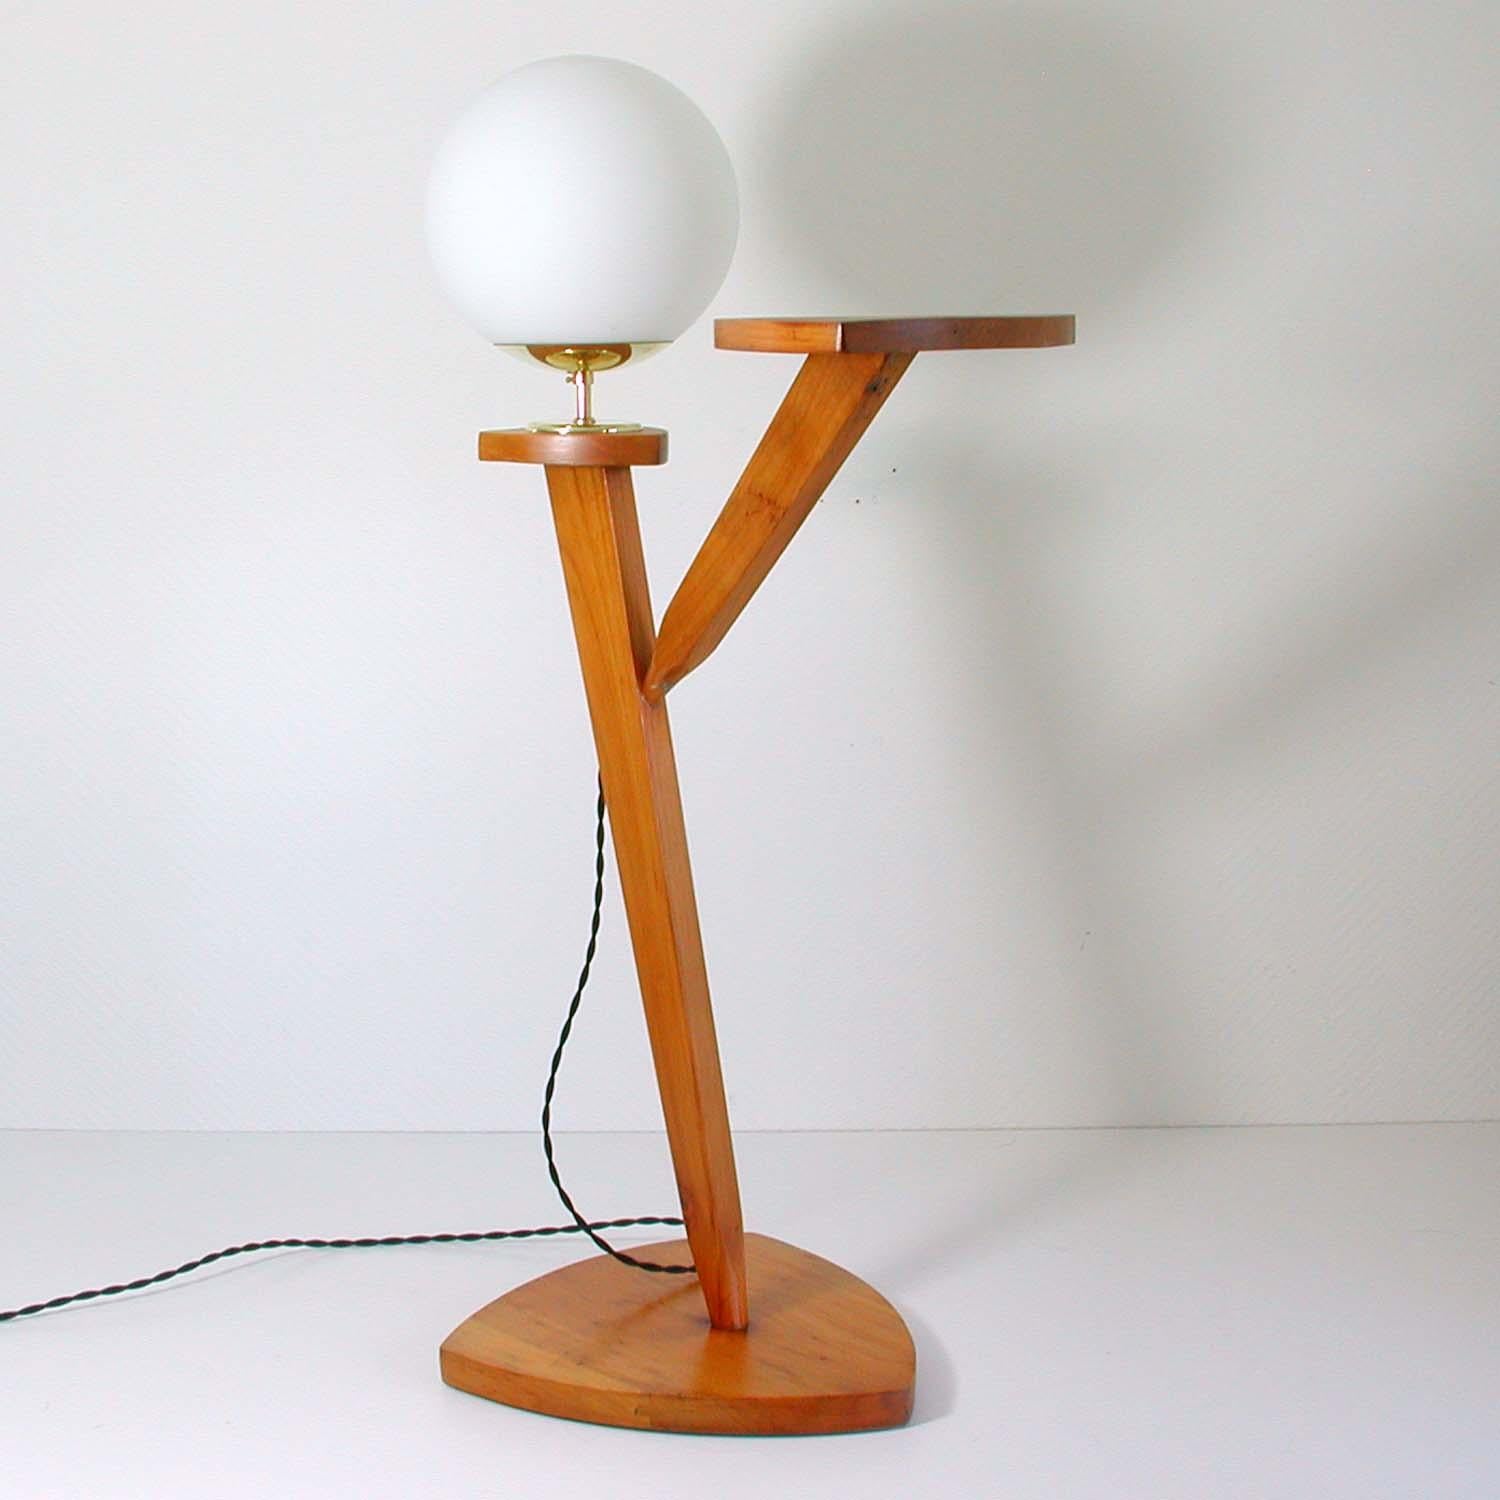 This vintage floor gueridon combo light was made in France in the 1950s. It is made of wood, has got a white opal glass lampshade and brass details. It can be used as a plant stand, a side table or an end table.

Rewired with new fabric wiring and